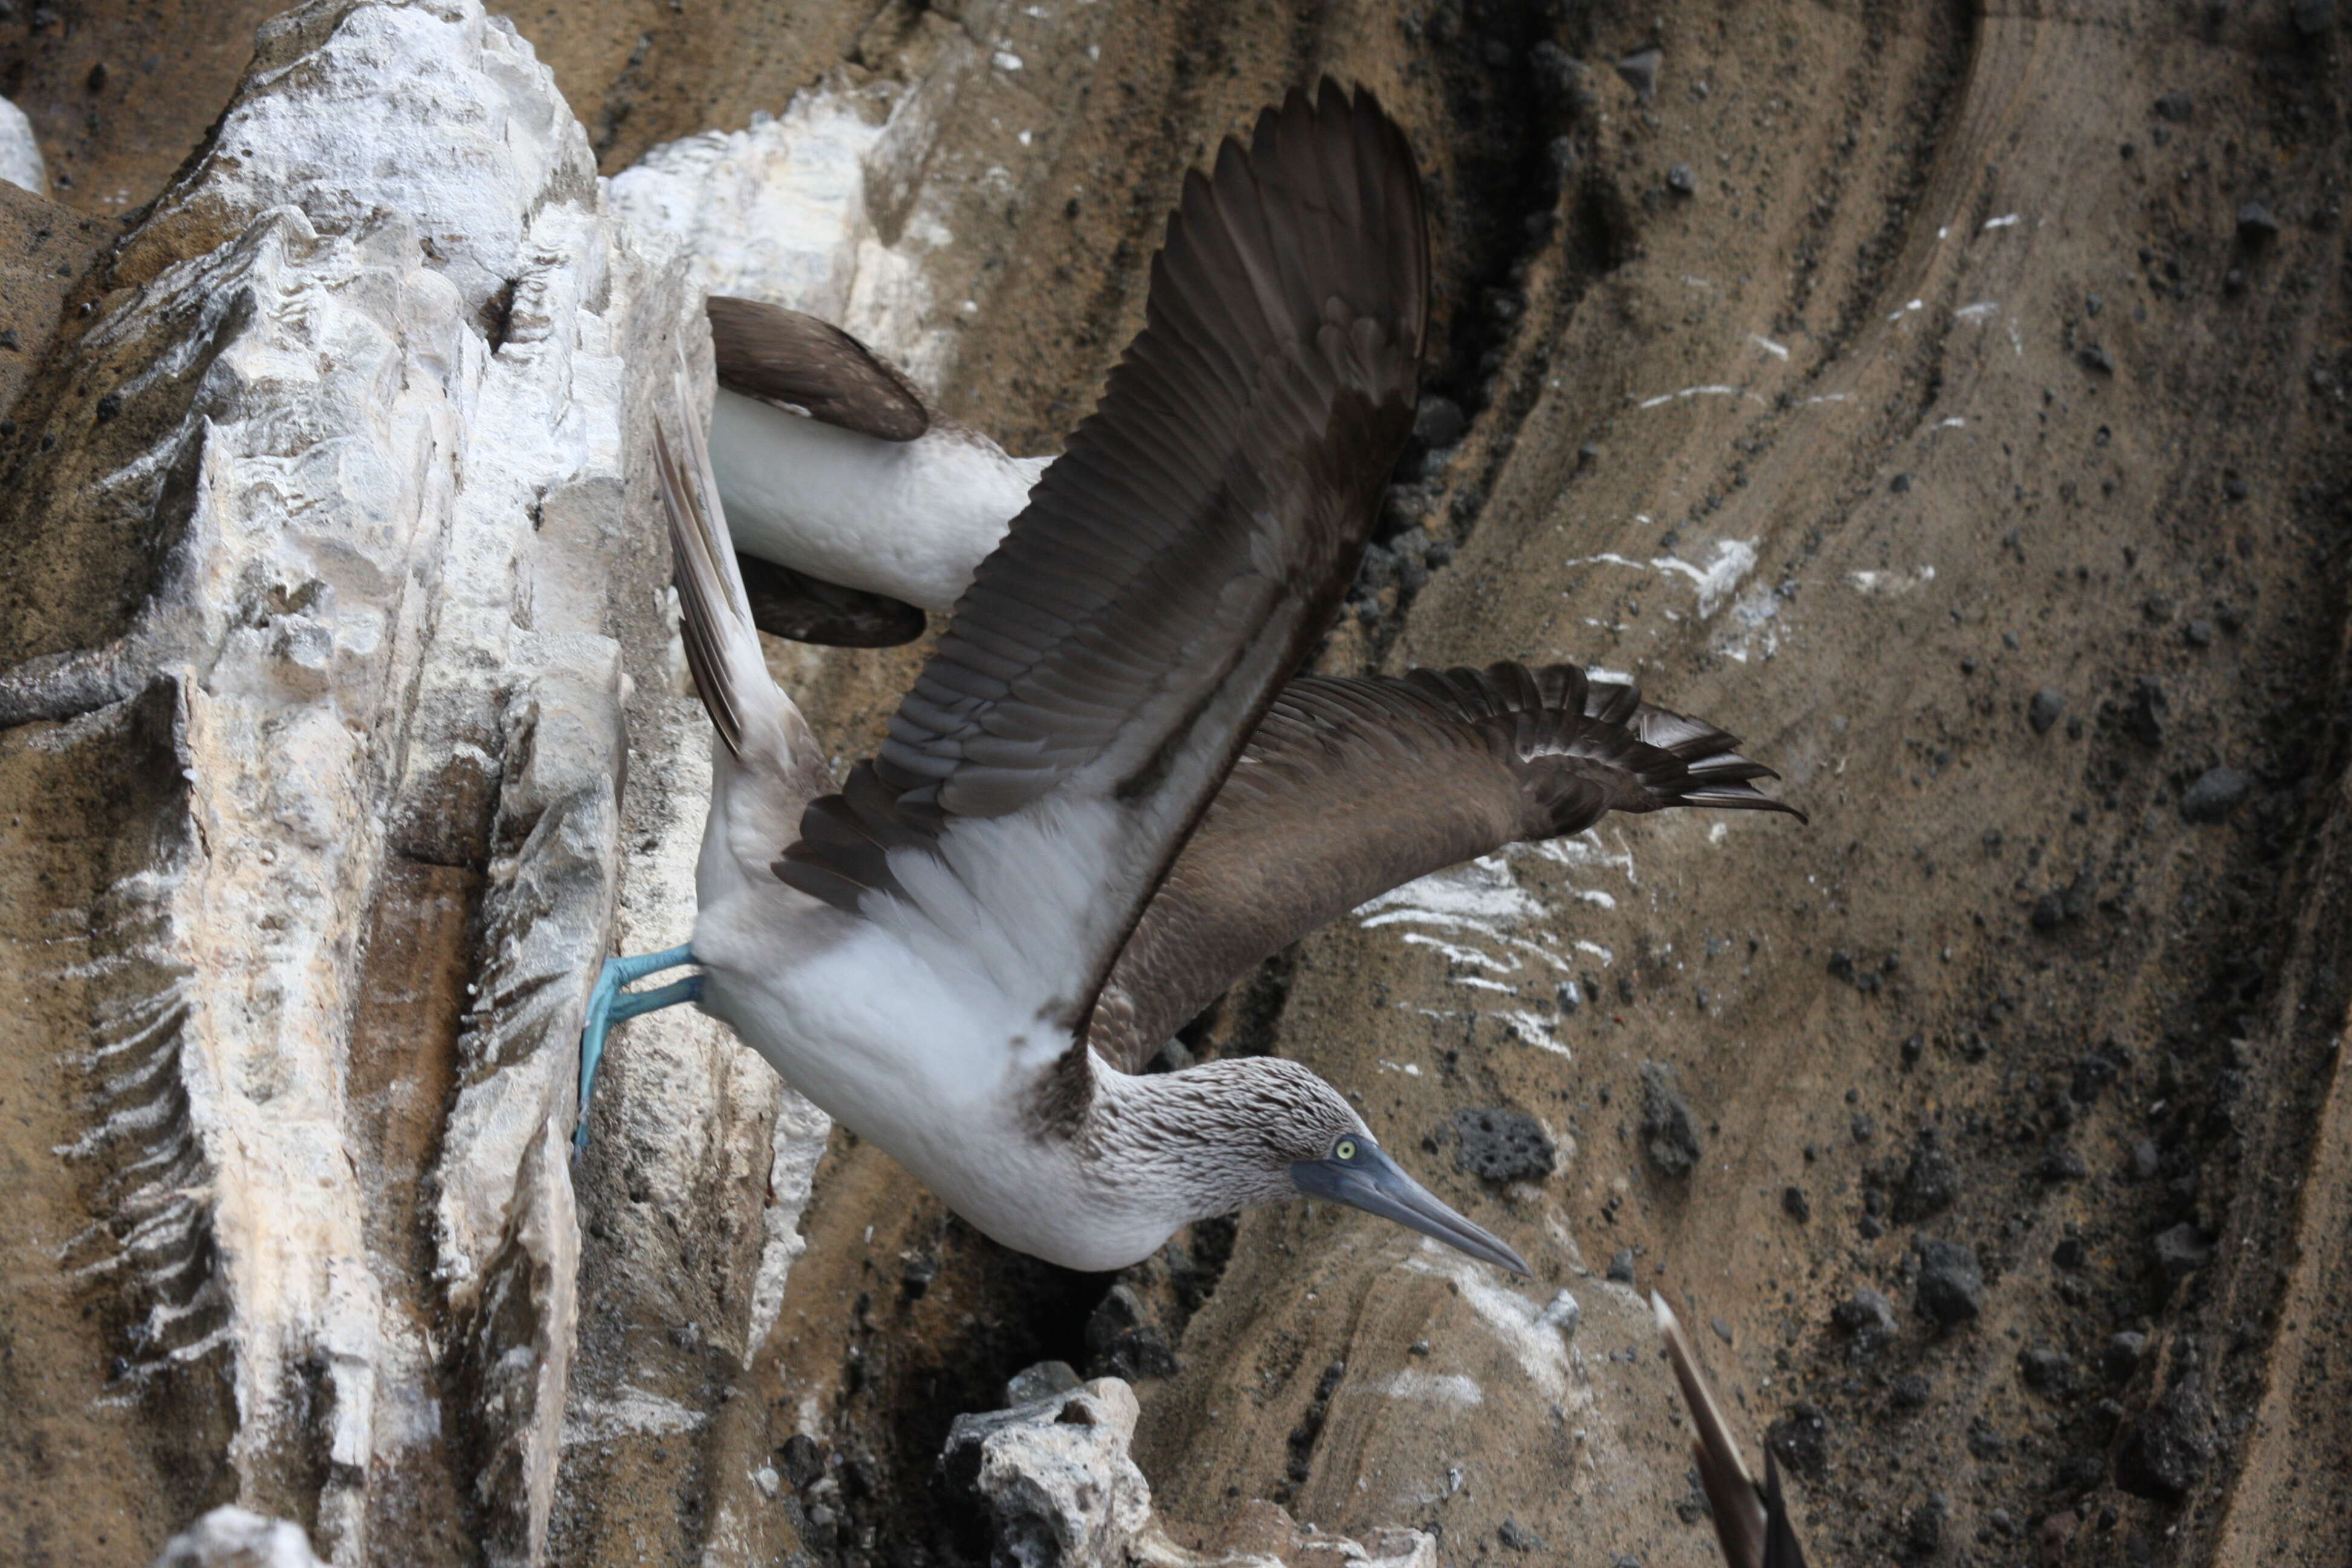 Image of gannets and boobies